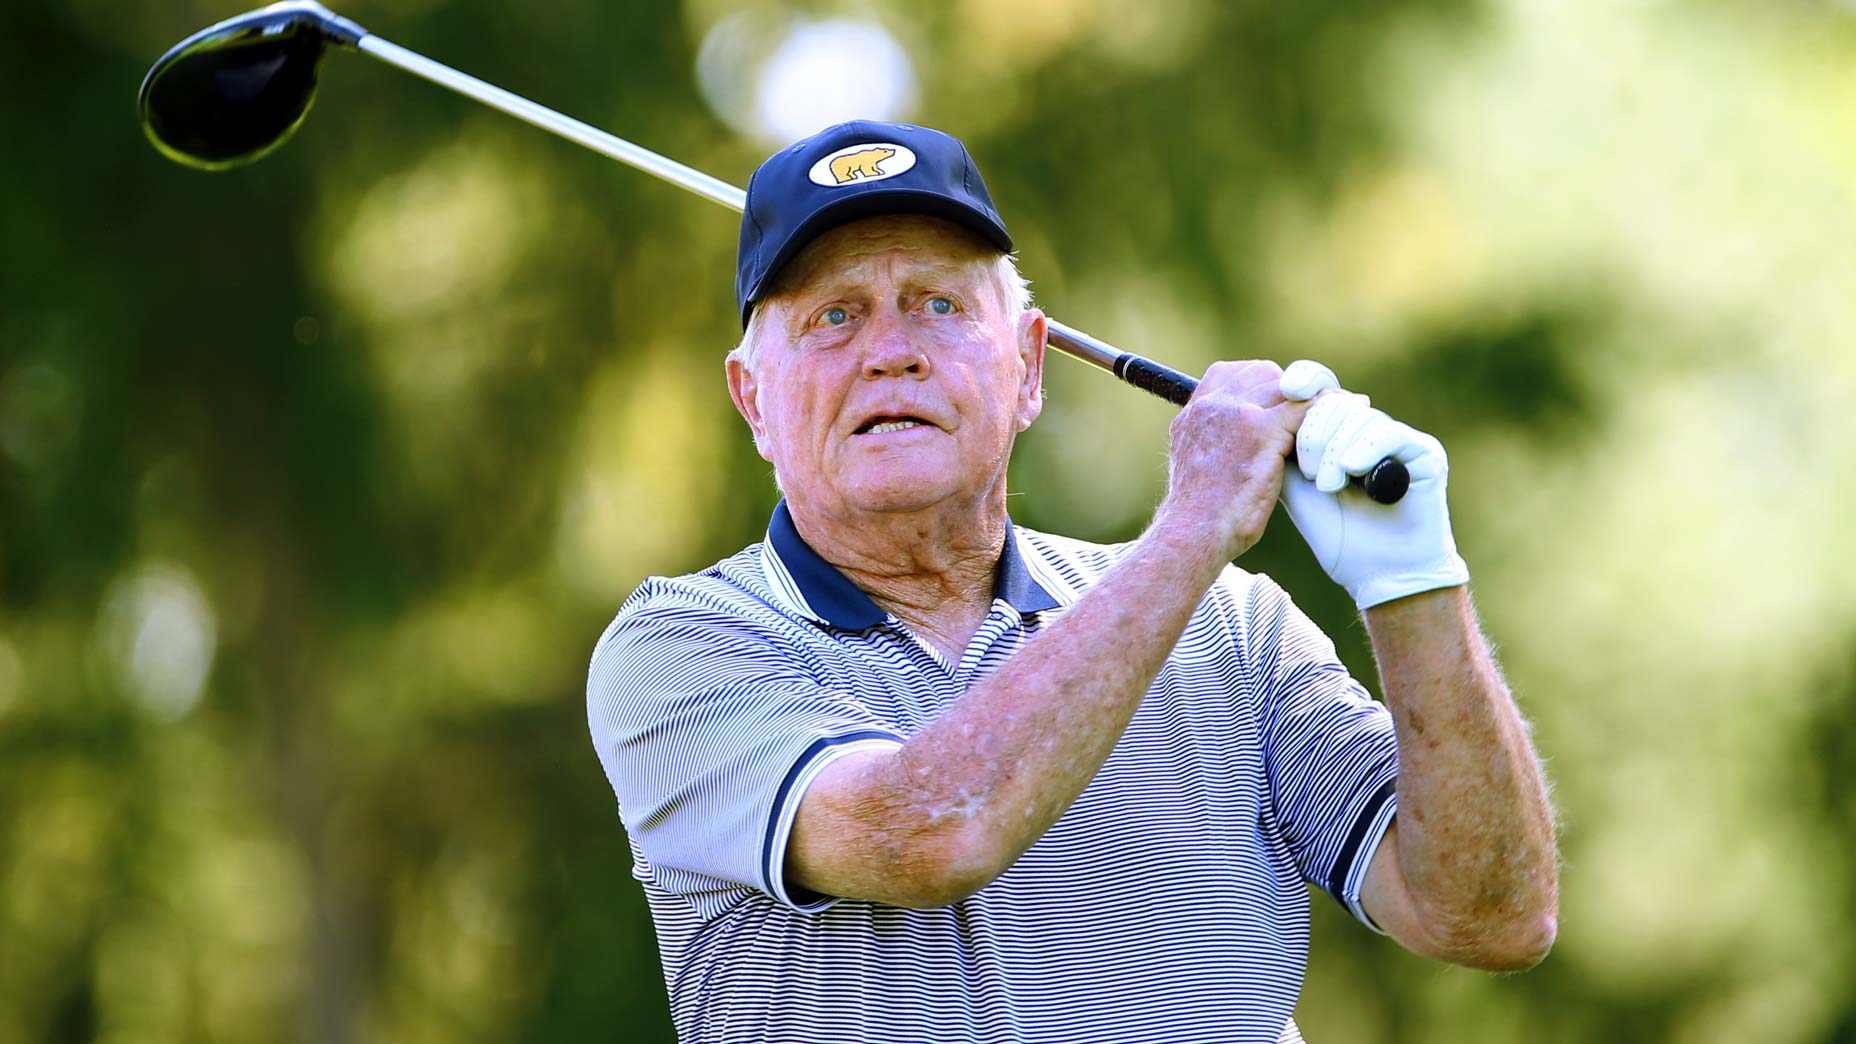 Jack Nicklaus Net Worth - $400 Million Fortune Of The Golden Bear